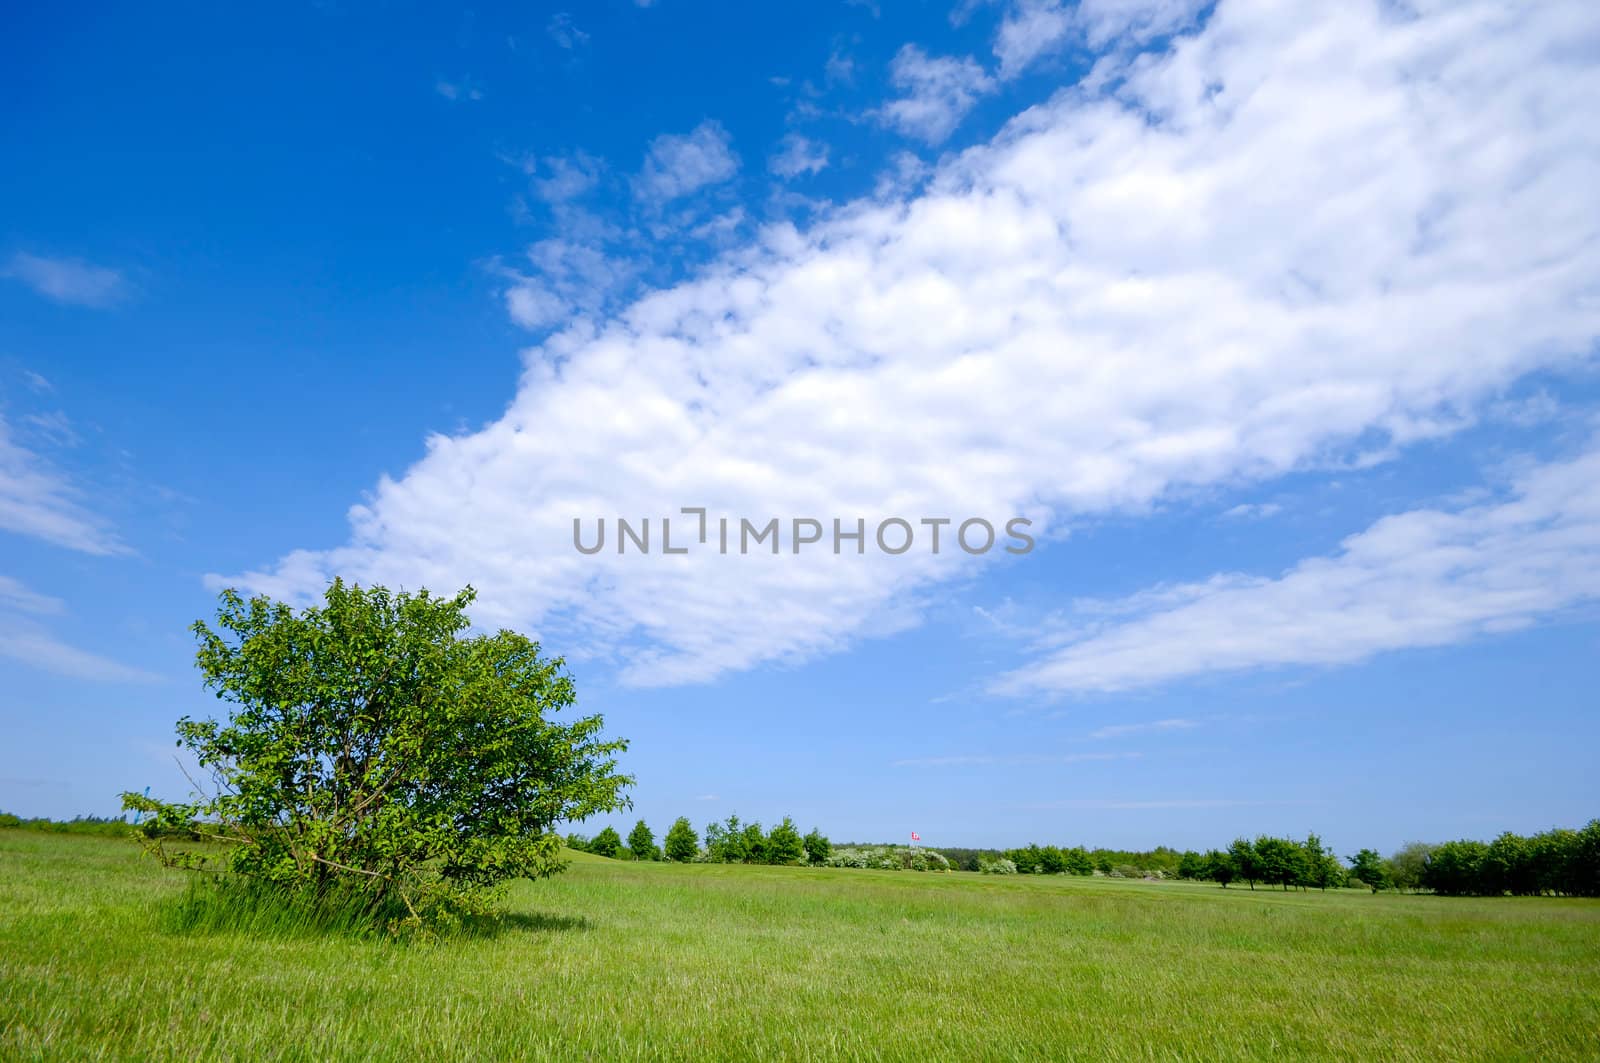 A green tree on a green field with blue and cloudy sky.